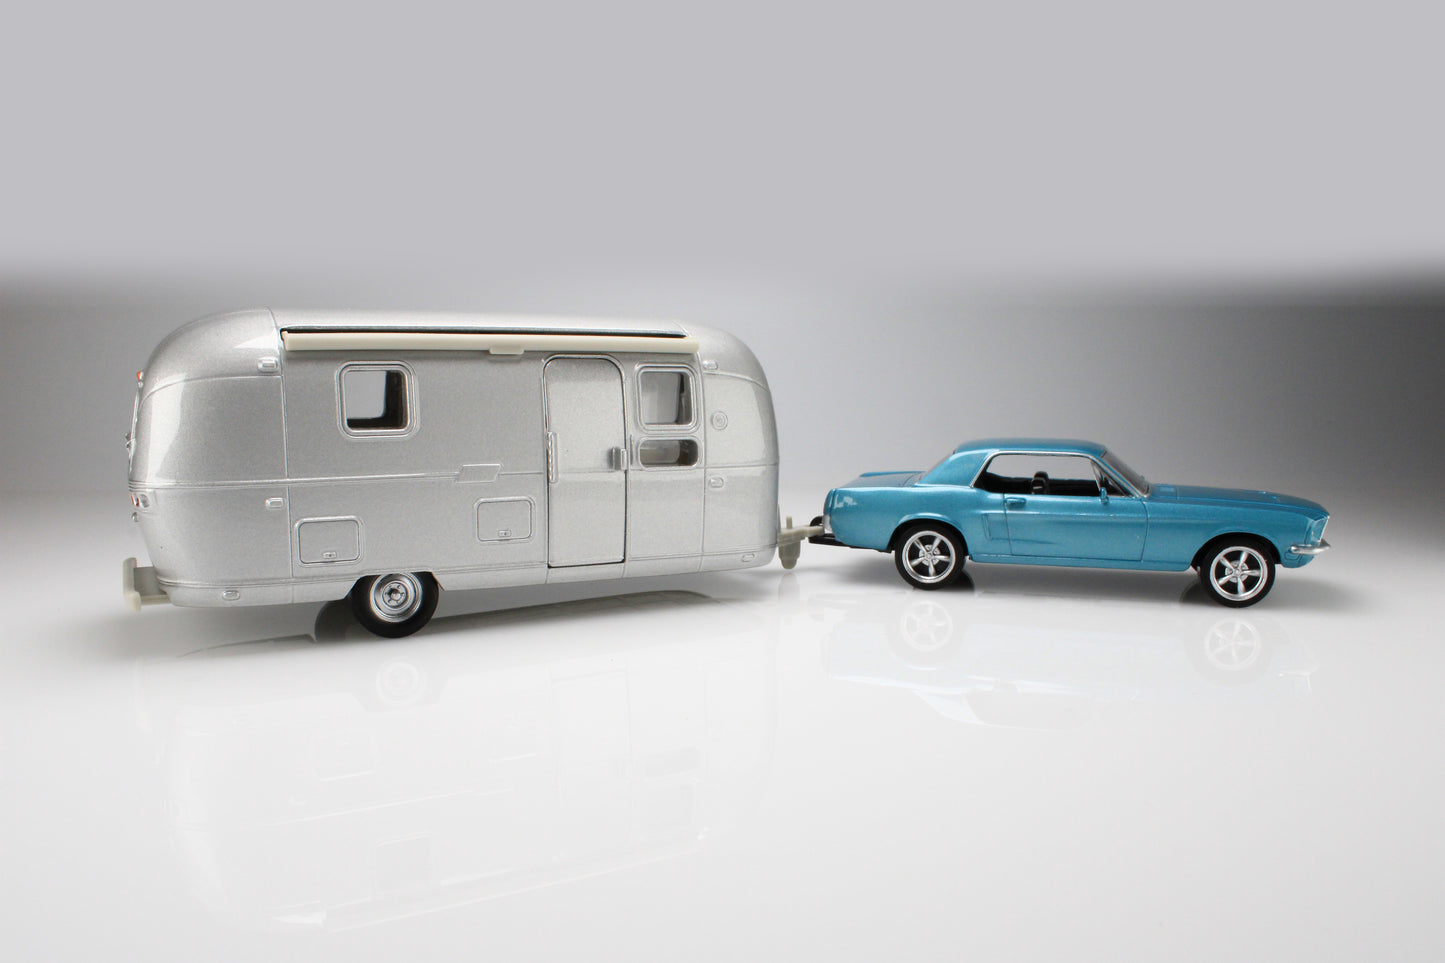 1968 Ford Mustang with Airstream Trailer